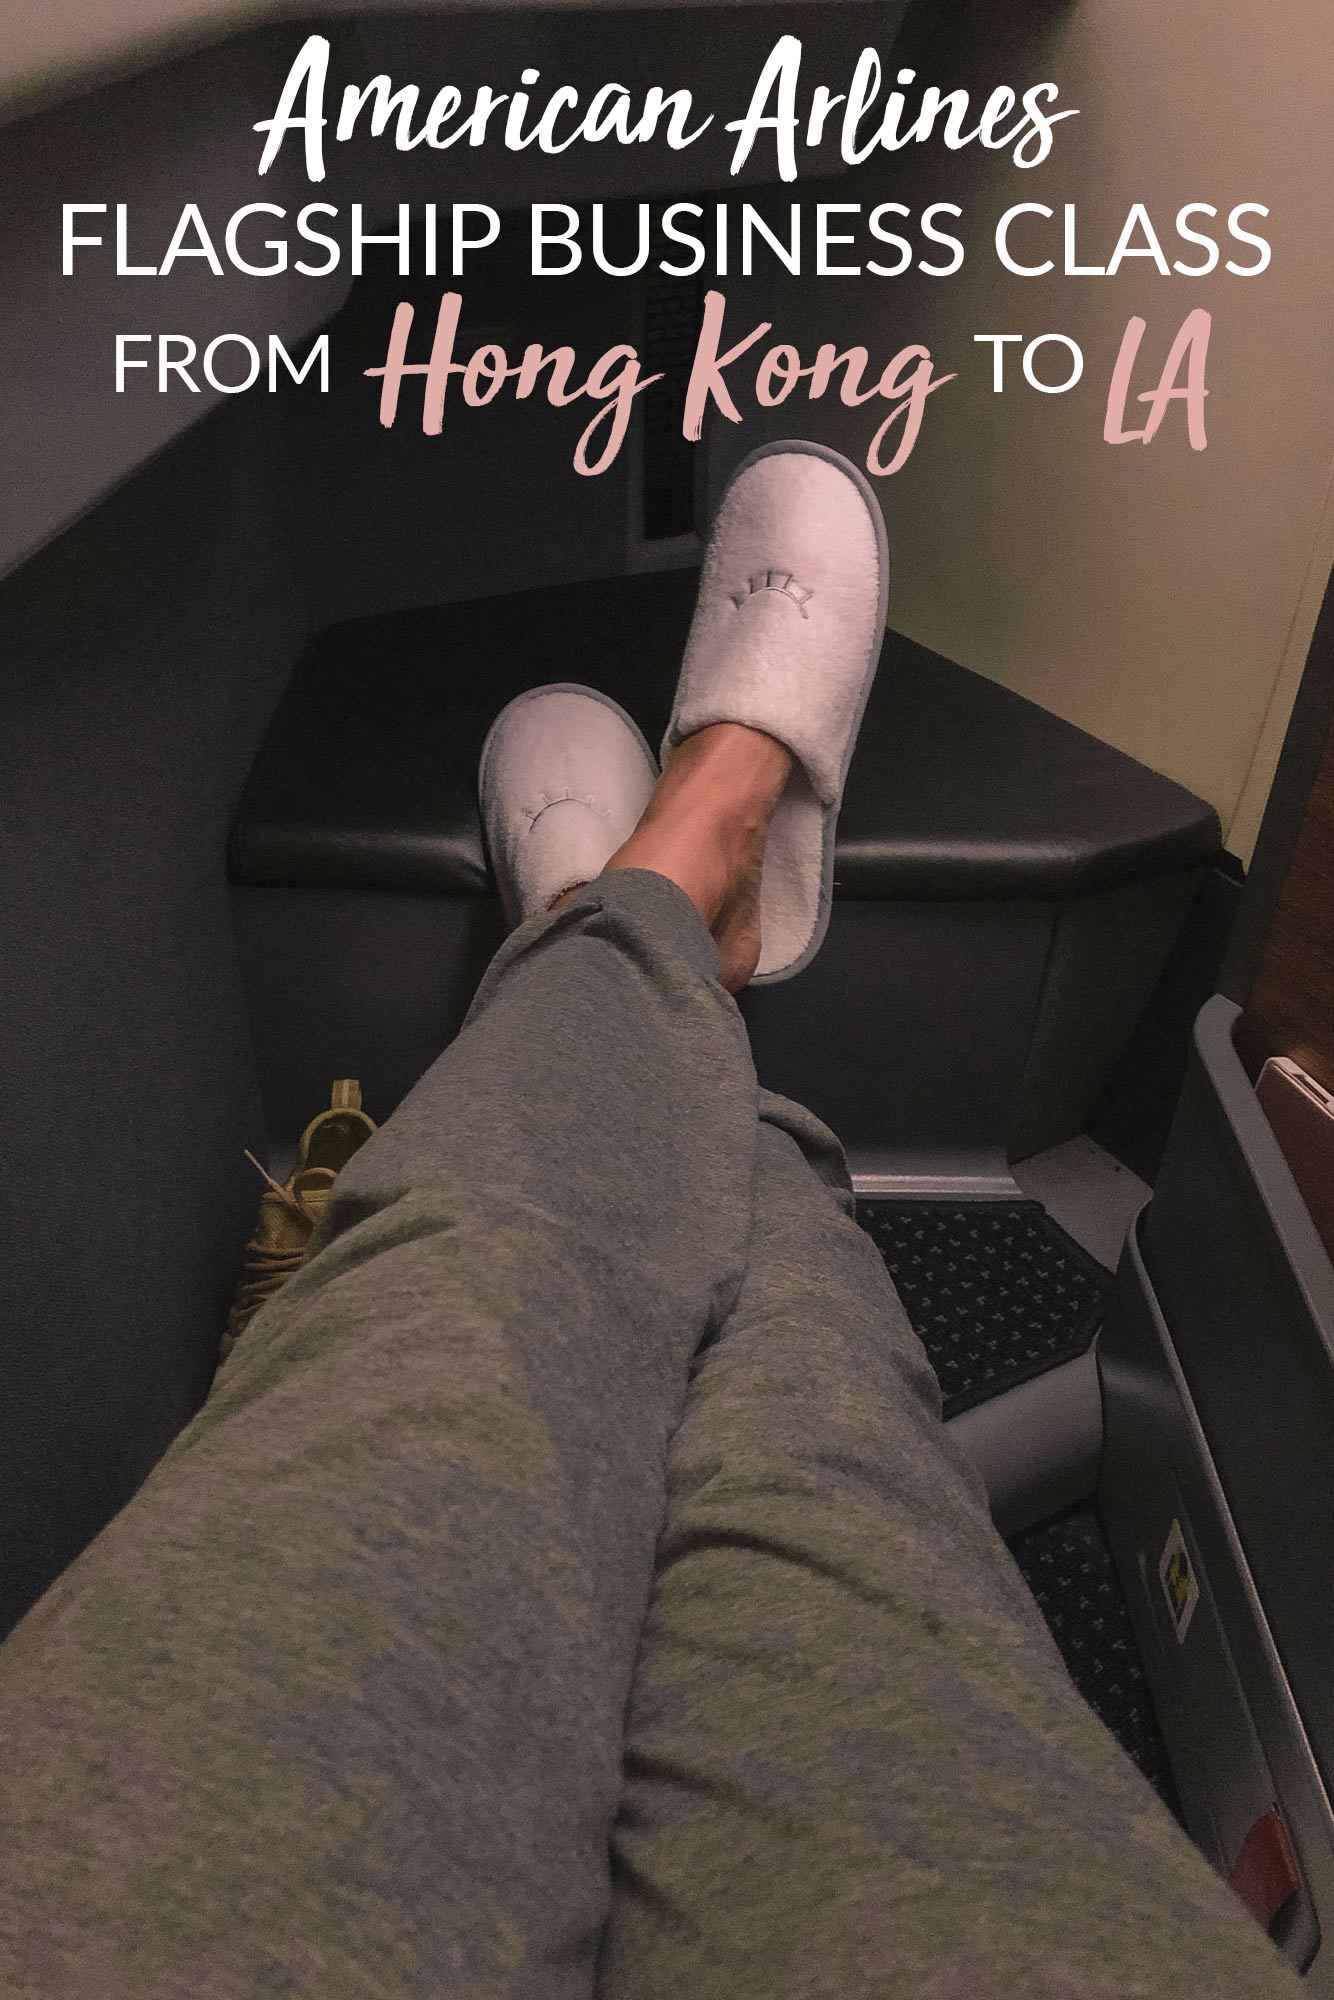 American Airlines Flagship Business Class Filght From Hong Kong to LA